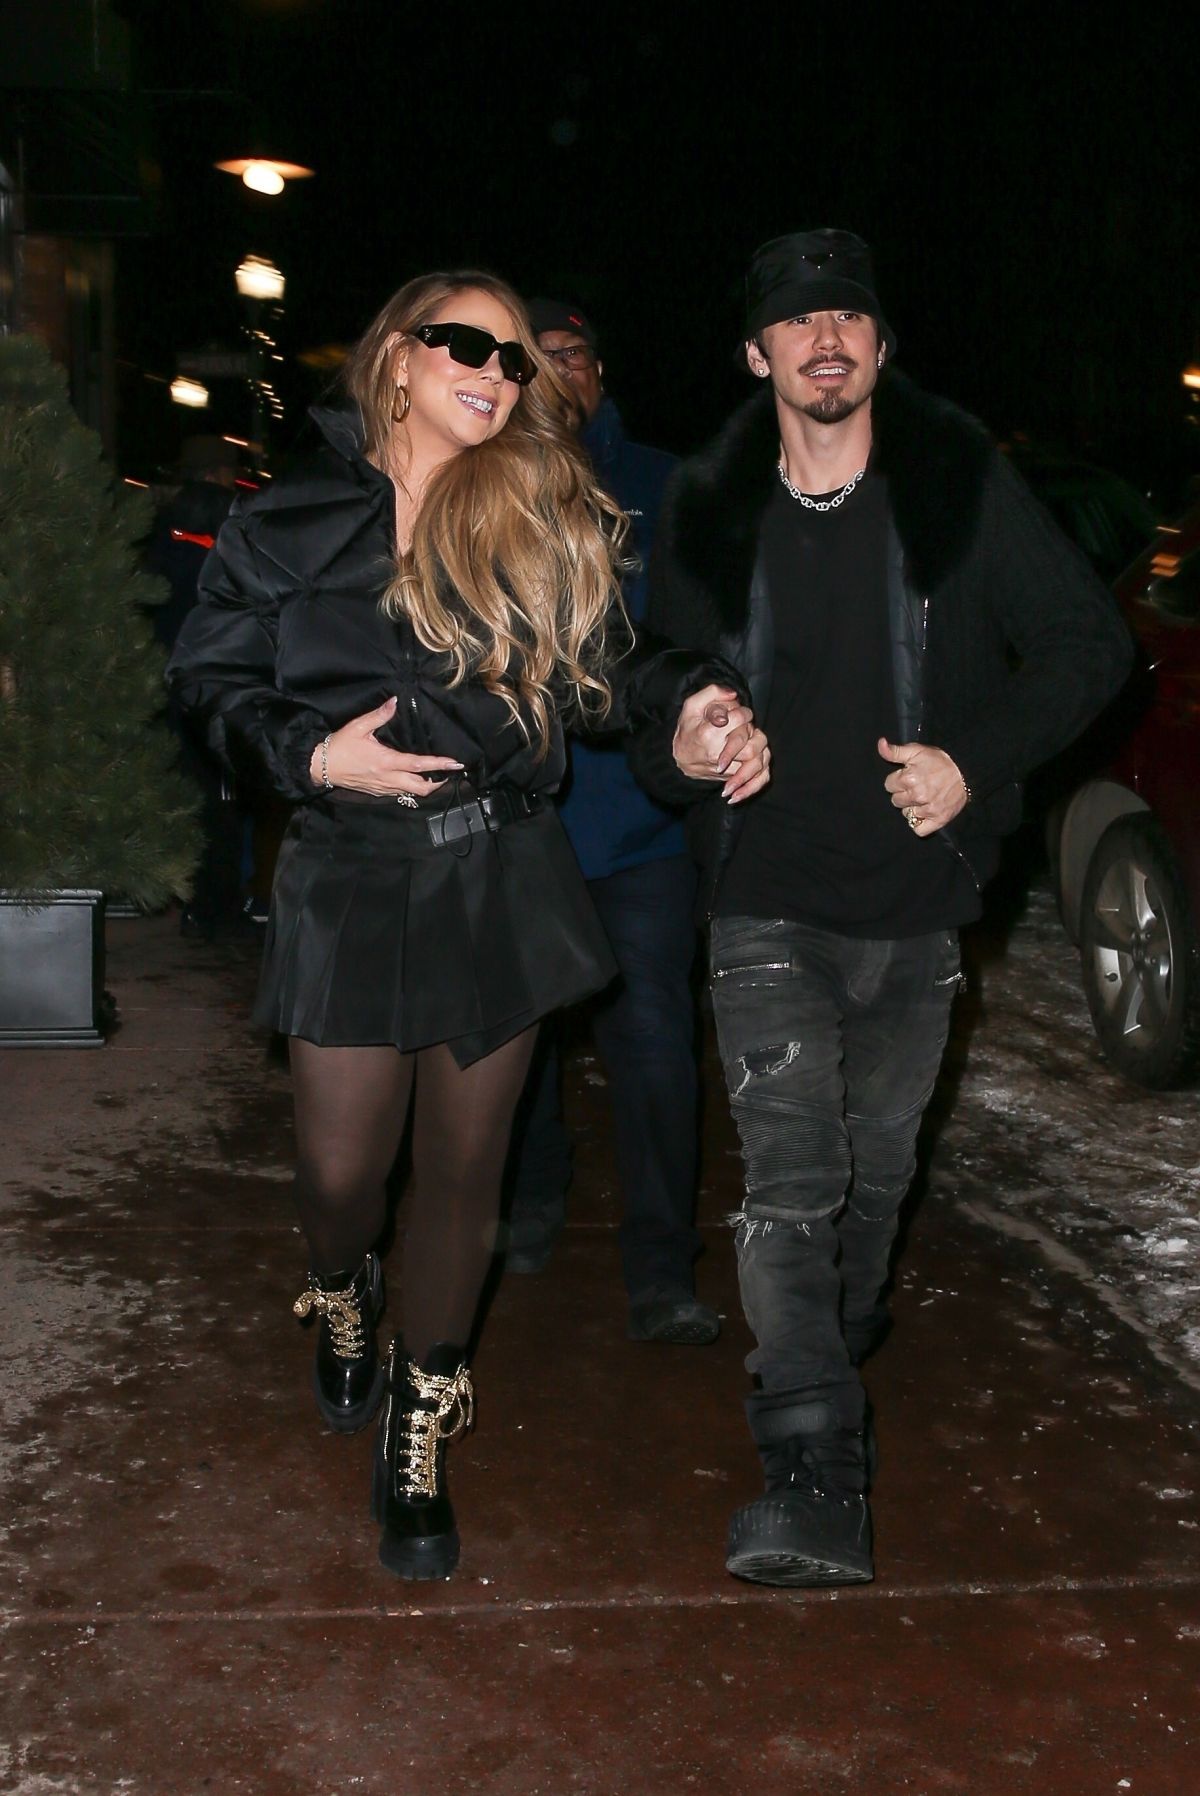 Mariah Carey wears visor shades and drinks champagne on trip to Louis  Vuitton store in Aspen